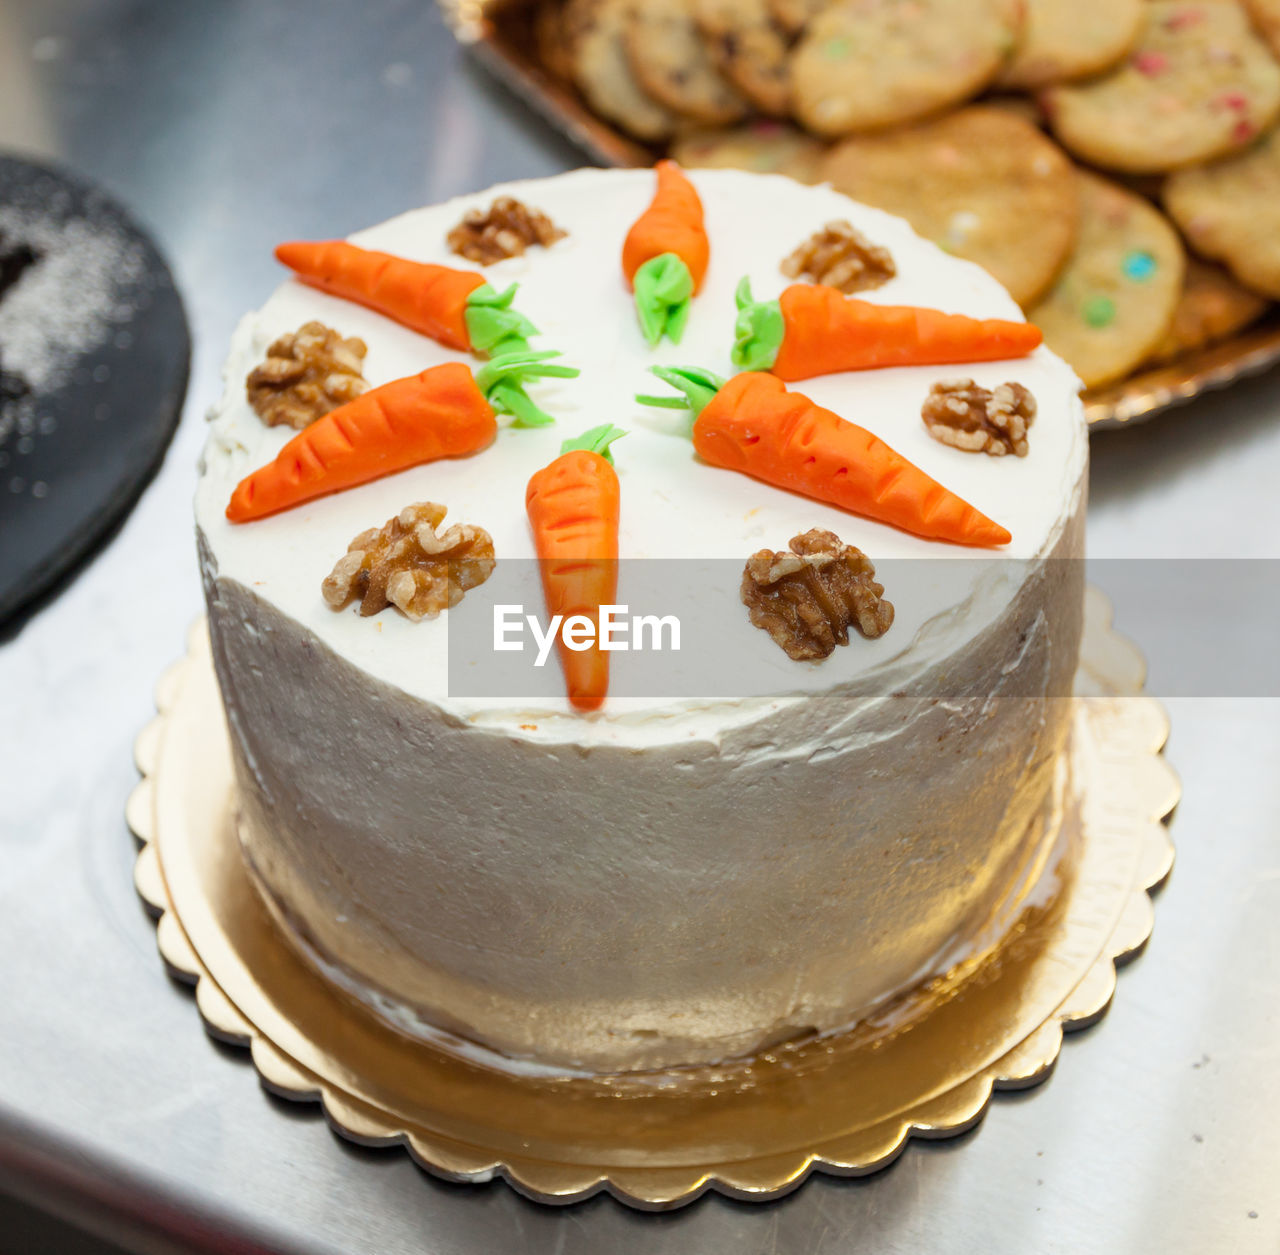 Carrot cake with cream cheese frosting and little carrots on top